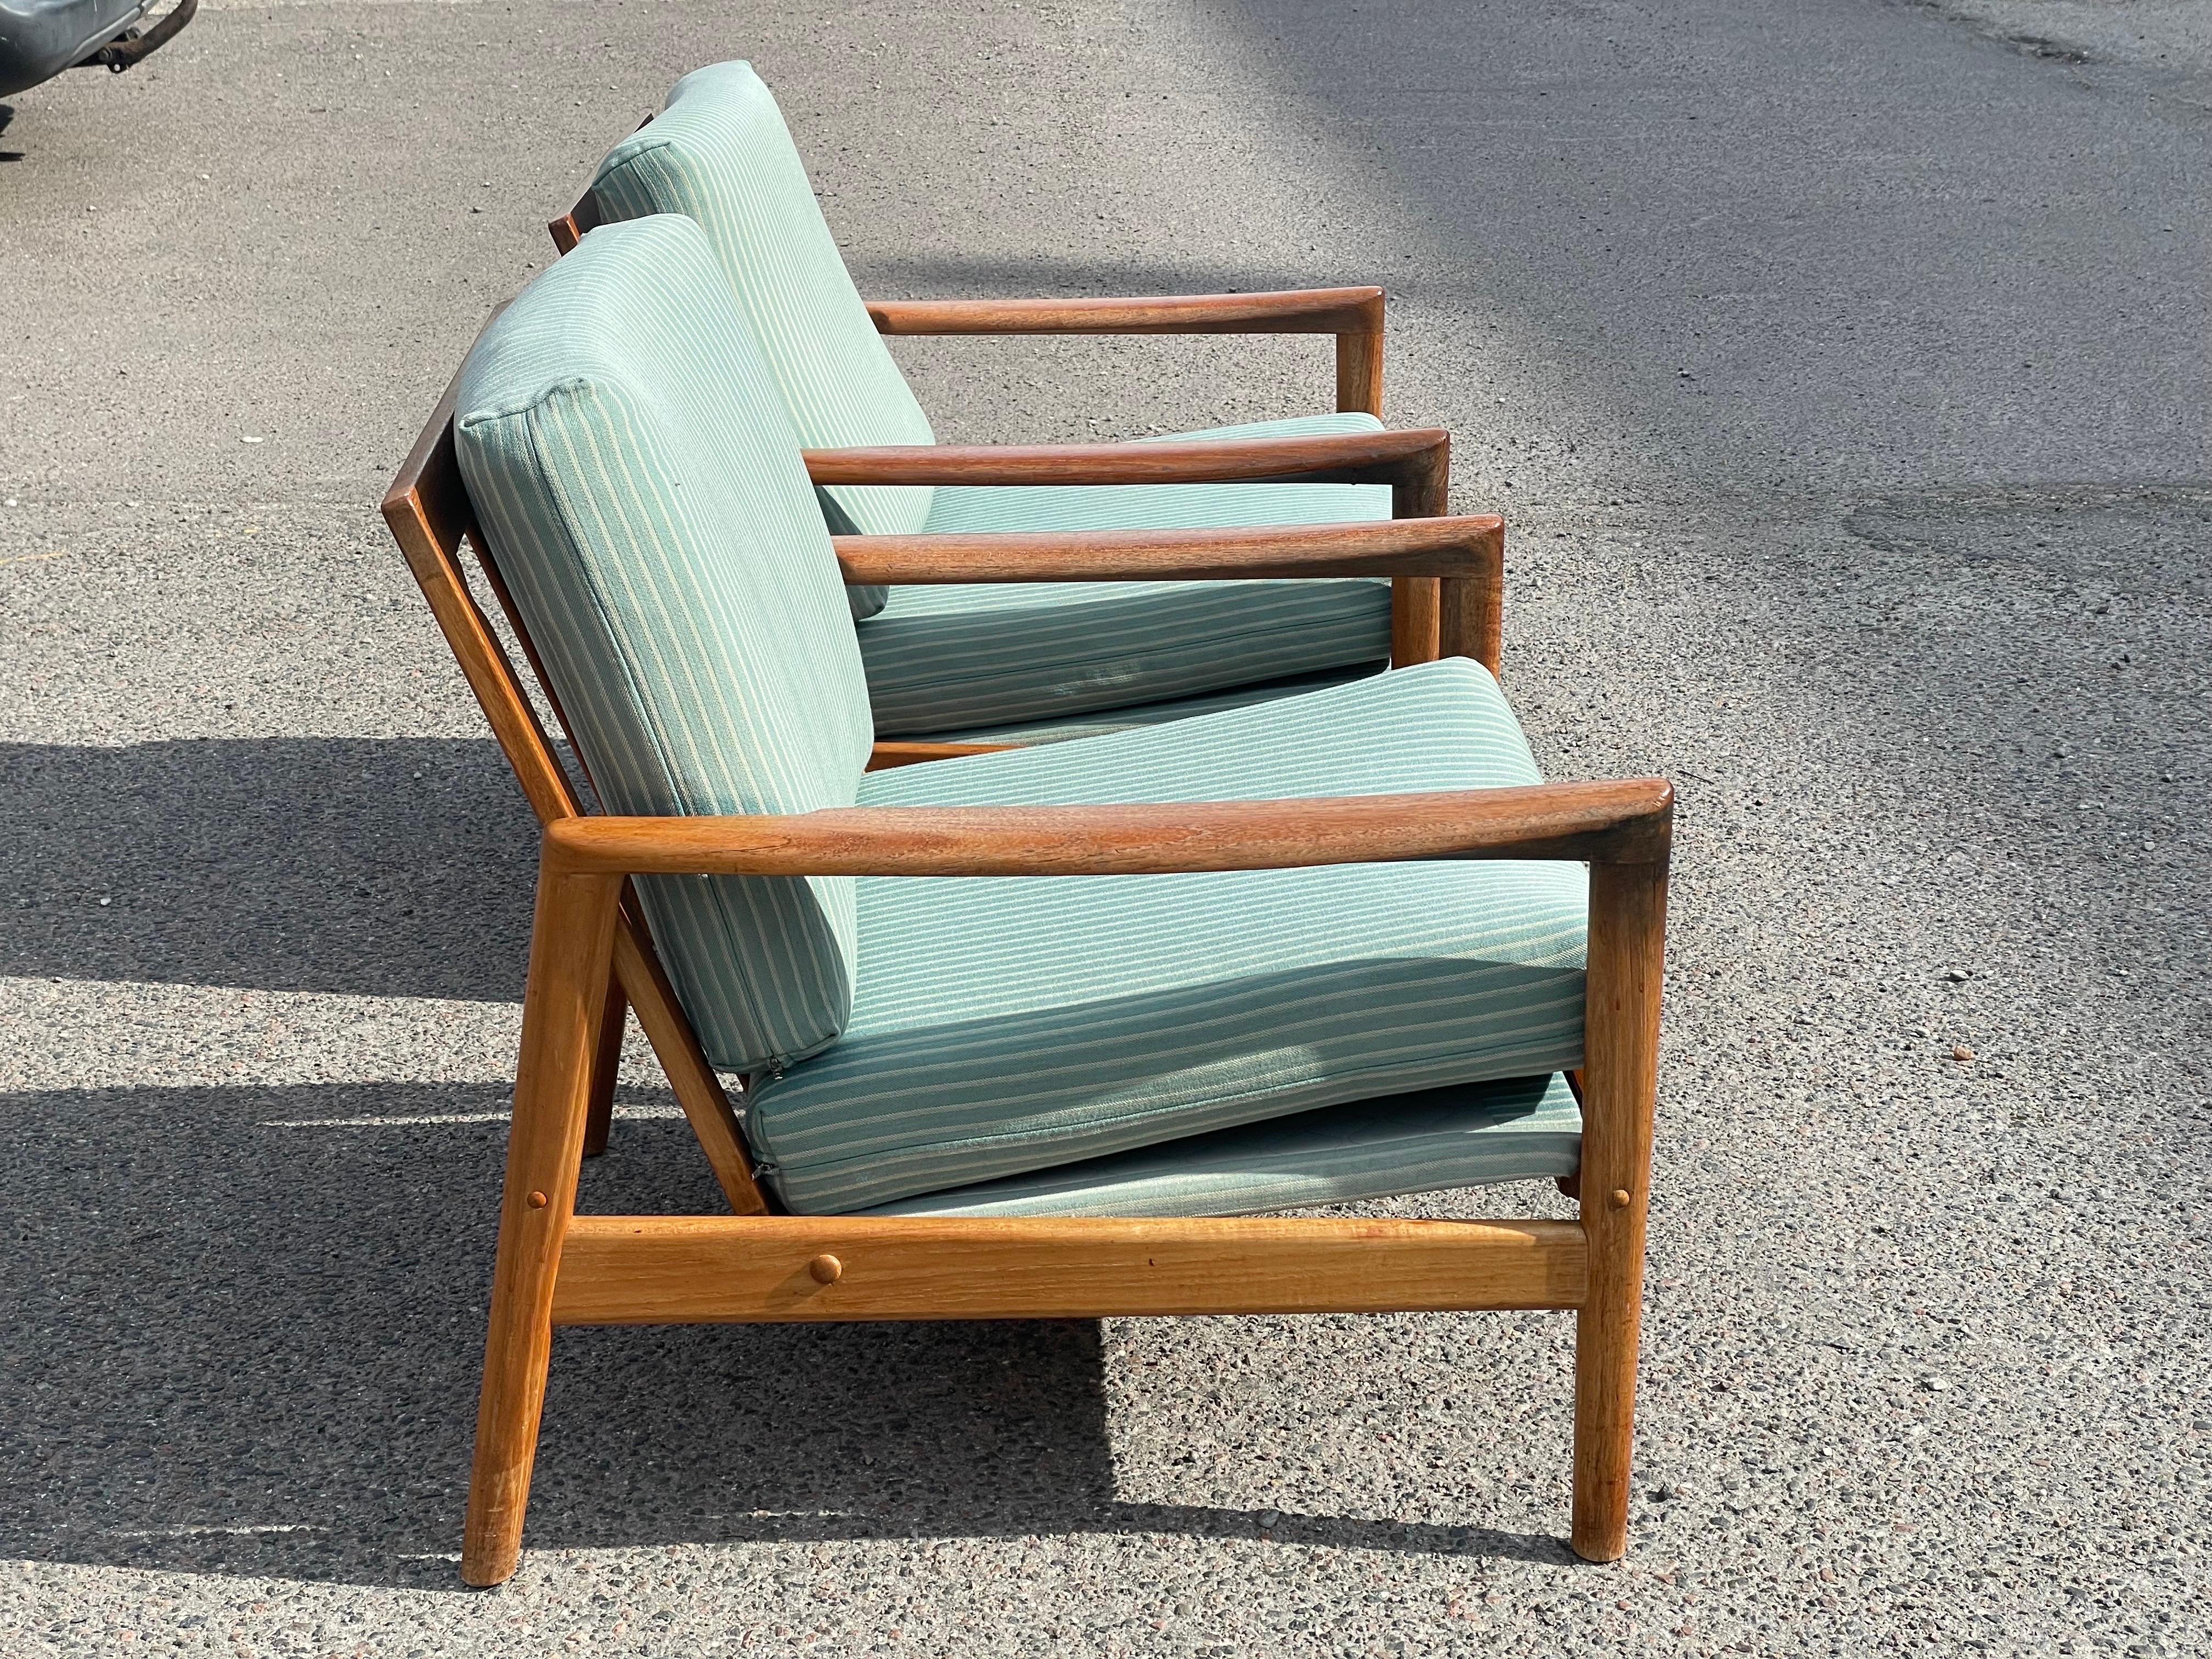 Mid-20th Century Set of Rare Seen Hans Olsen Teak Chairs by Juul Kristensen from the 1960s For Sale